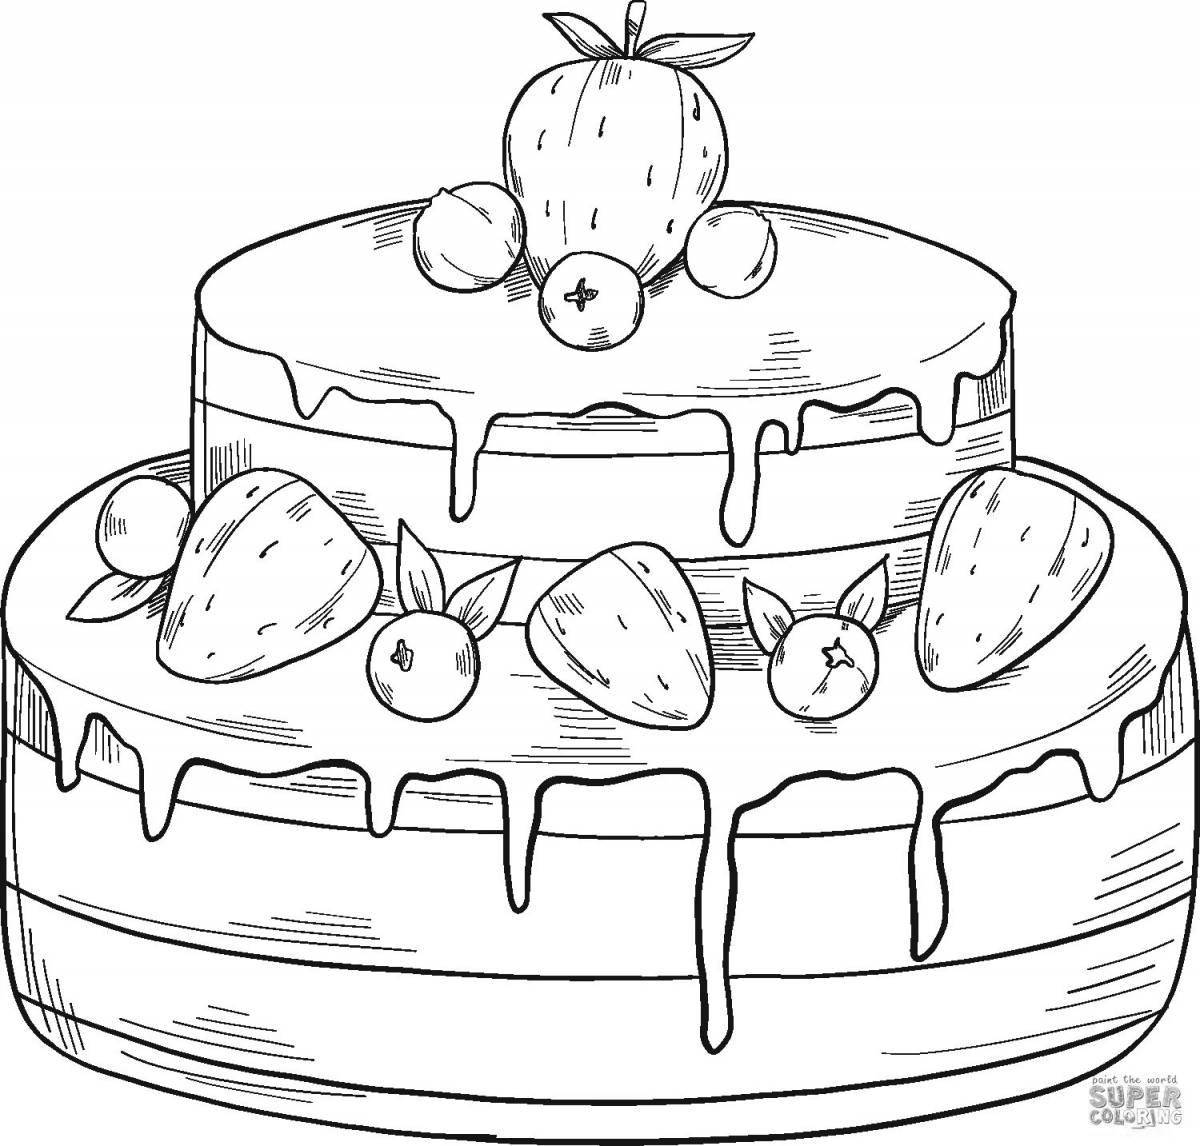 Gourmet birthday cake coloring page